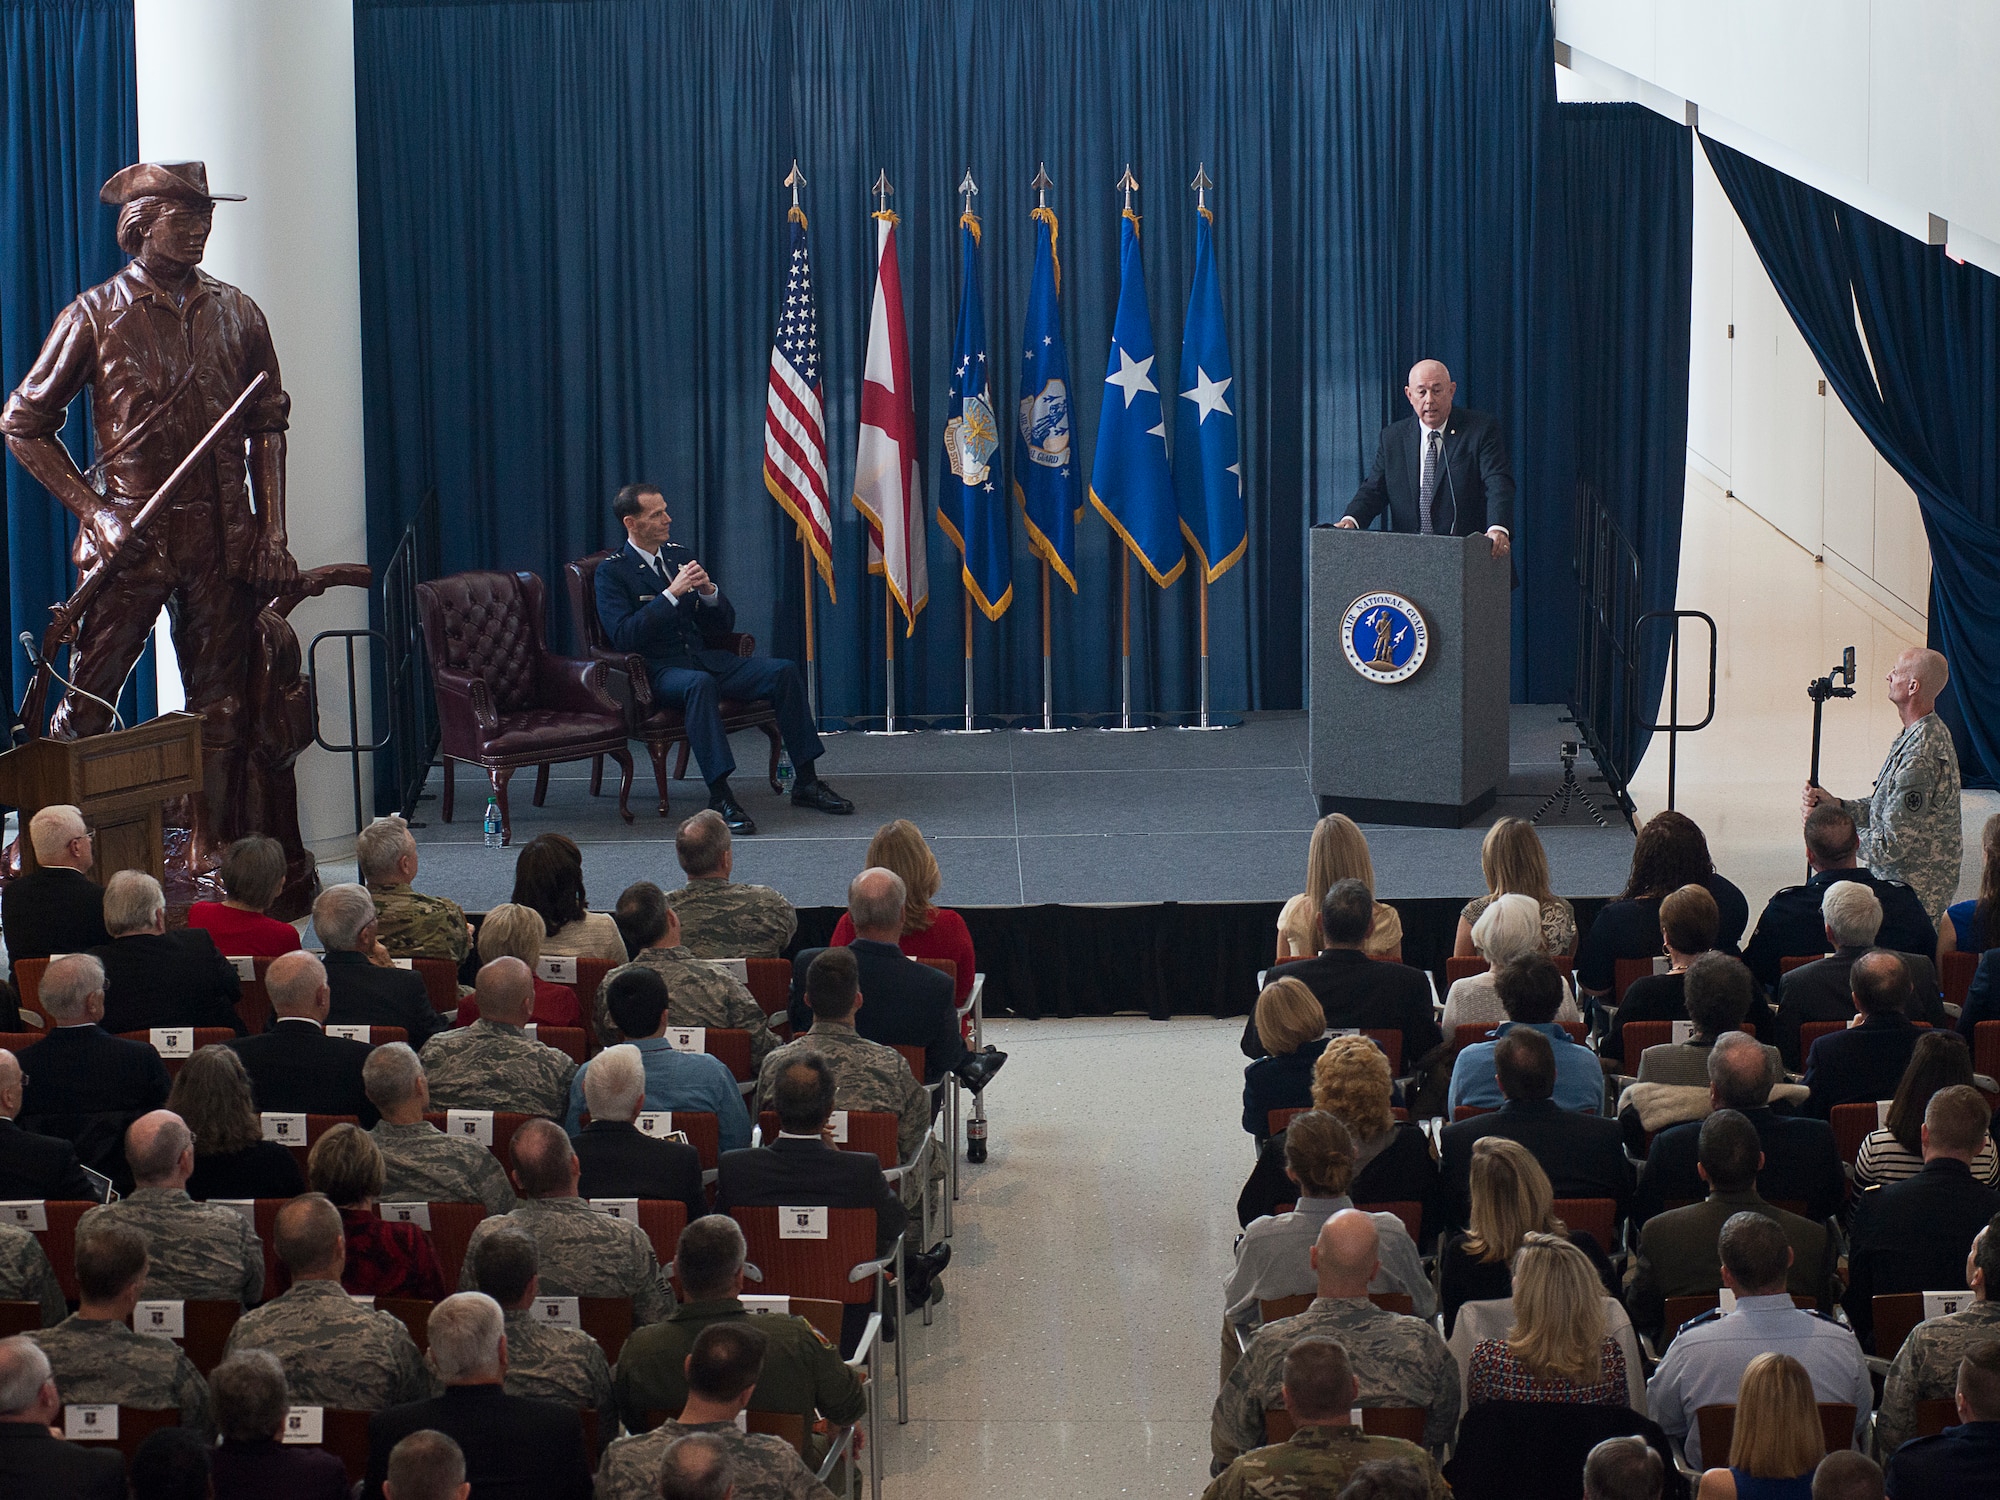 Retired General T. Michael Moseley, former Air Force chief of staff, speaks at a retirement ceremony for Lt. Gen. Stanley E. Clarke, III, Air National Guard director, held at the Air National Guard Readiness Center on Joint Base Andrews, Md., December 18, 2015. Clarke is the 15th ANG director, and has served in that position since March, 2013. (U.S. Air National Guard photo by Staff Sgt. John E. Hillier/Released)